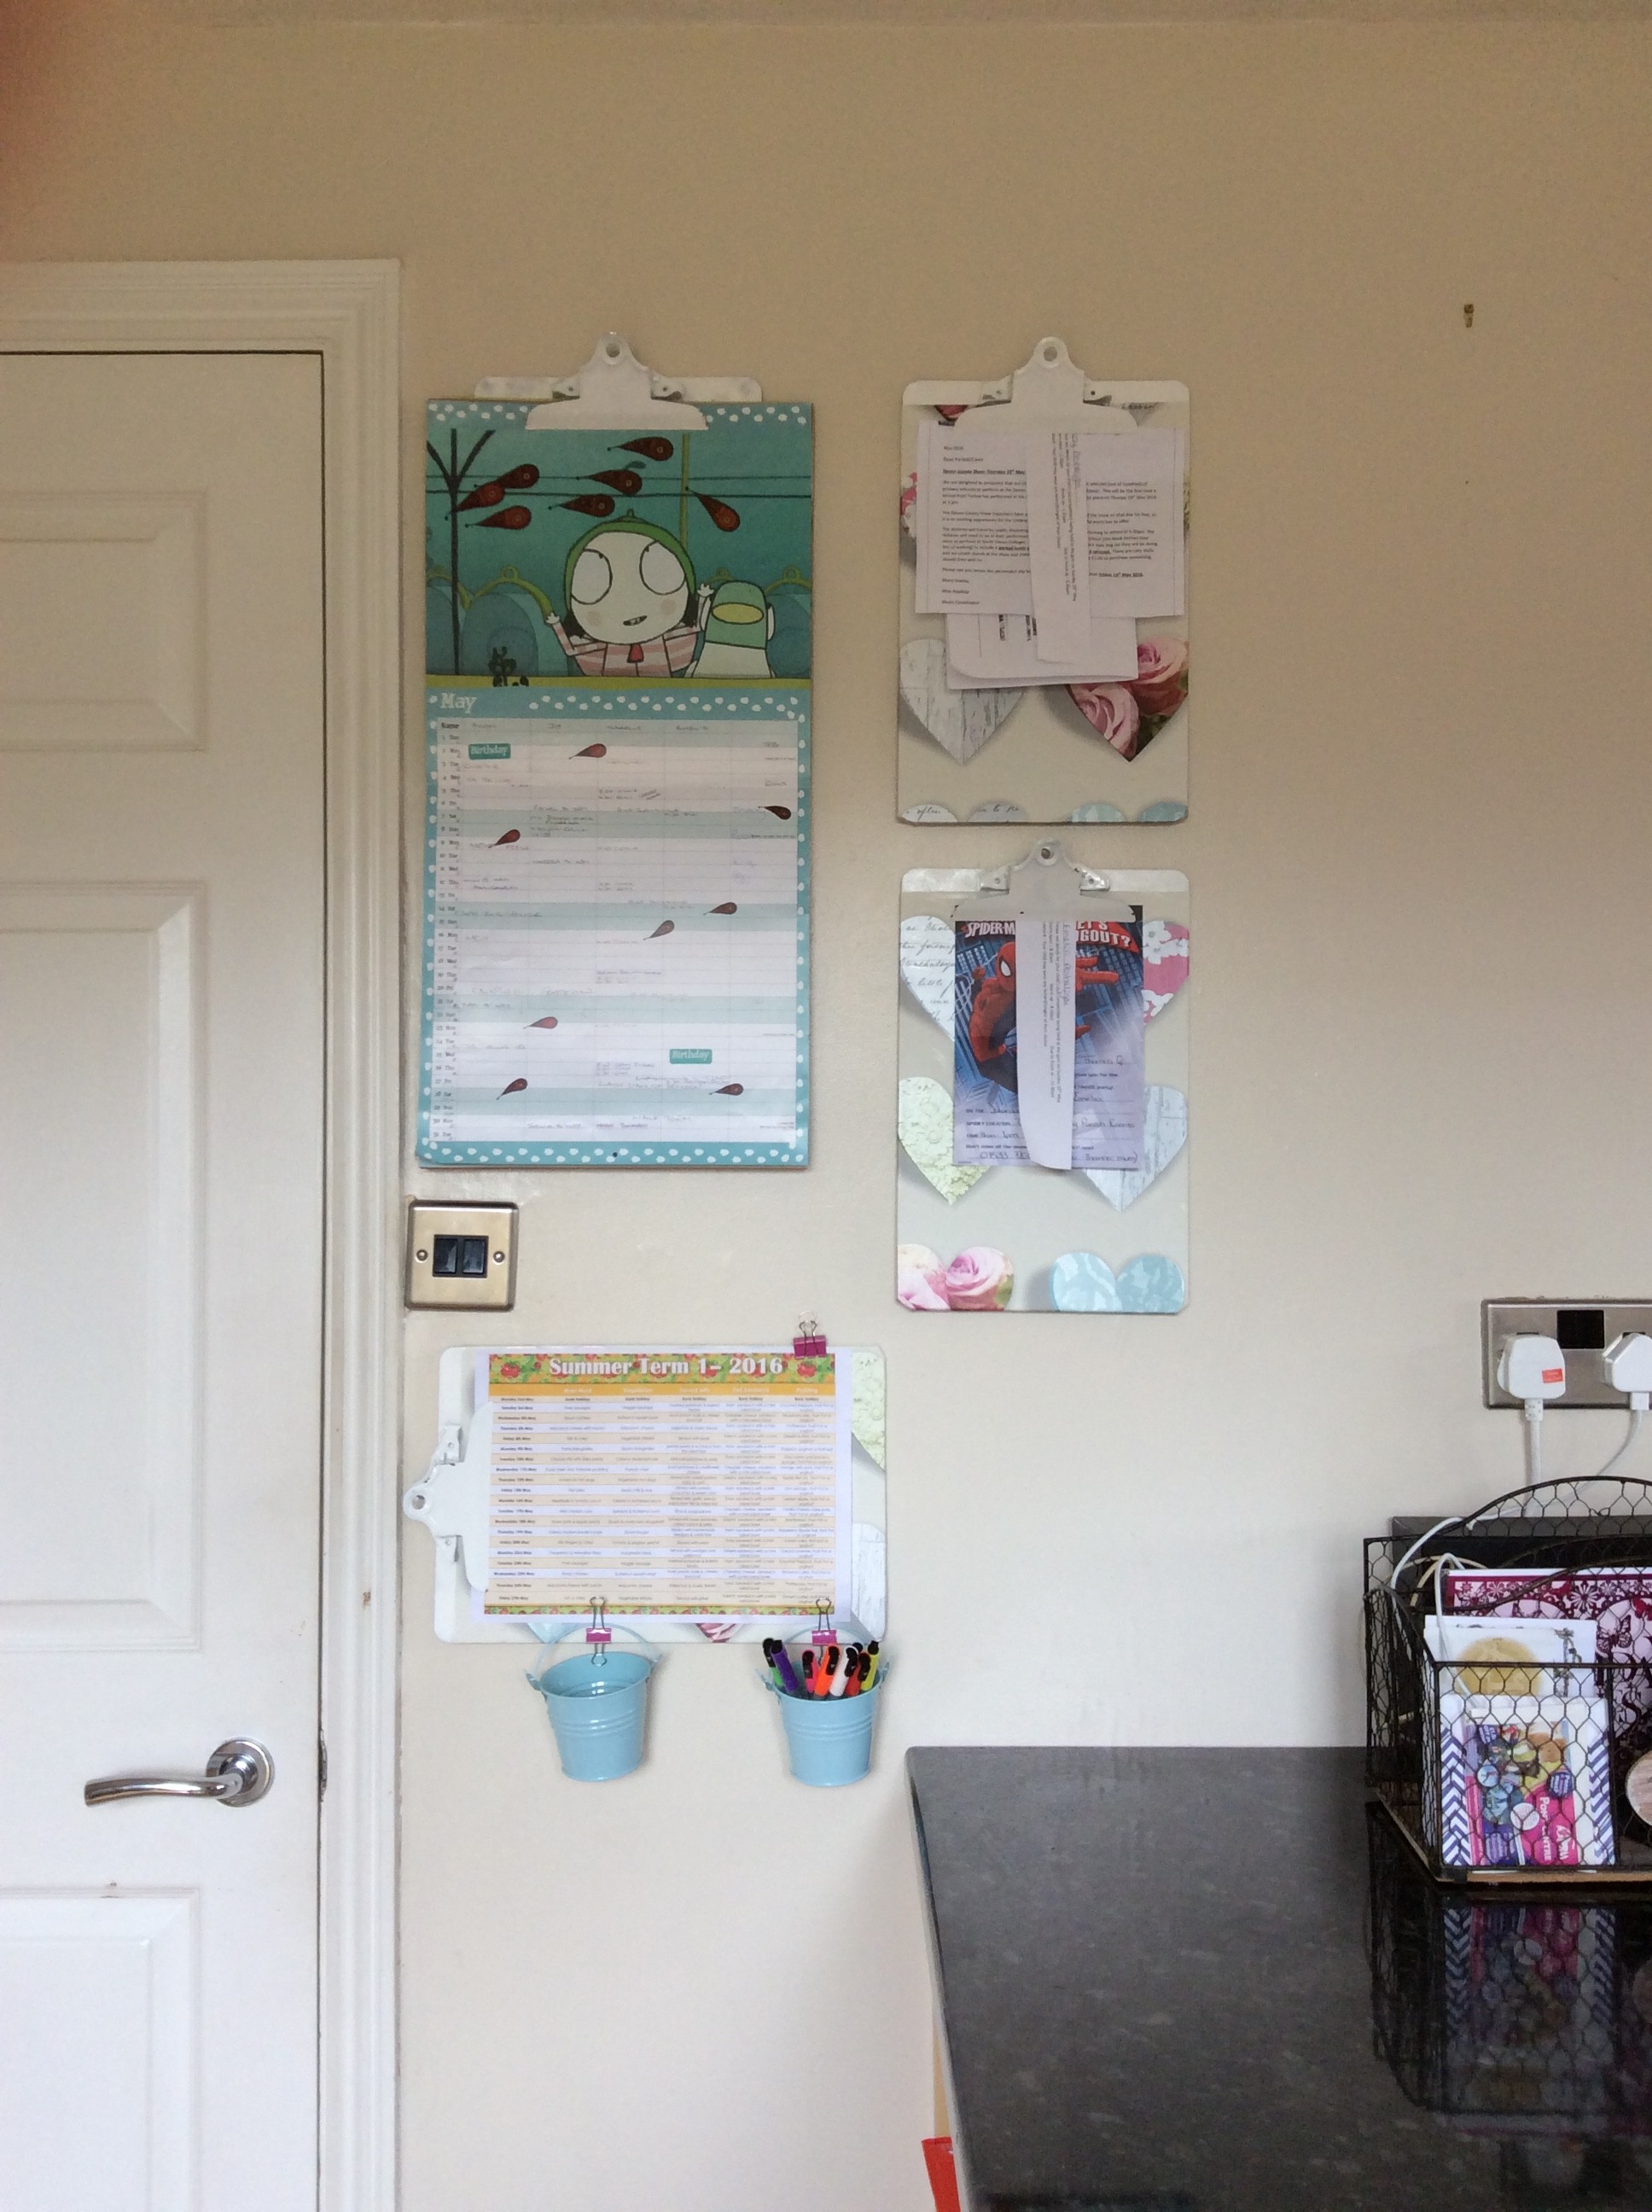 Kitchen wall with clipboards hanging up to hold school paperwork